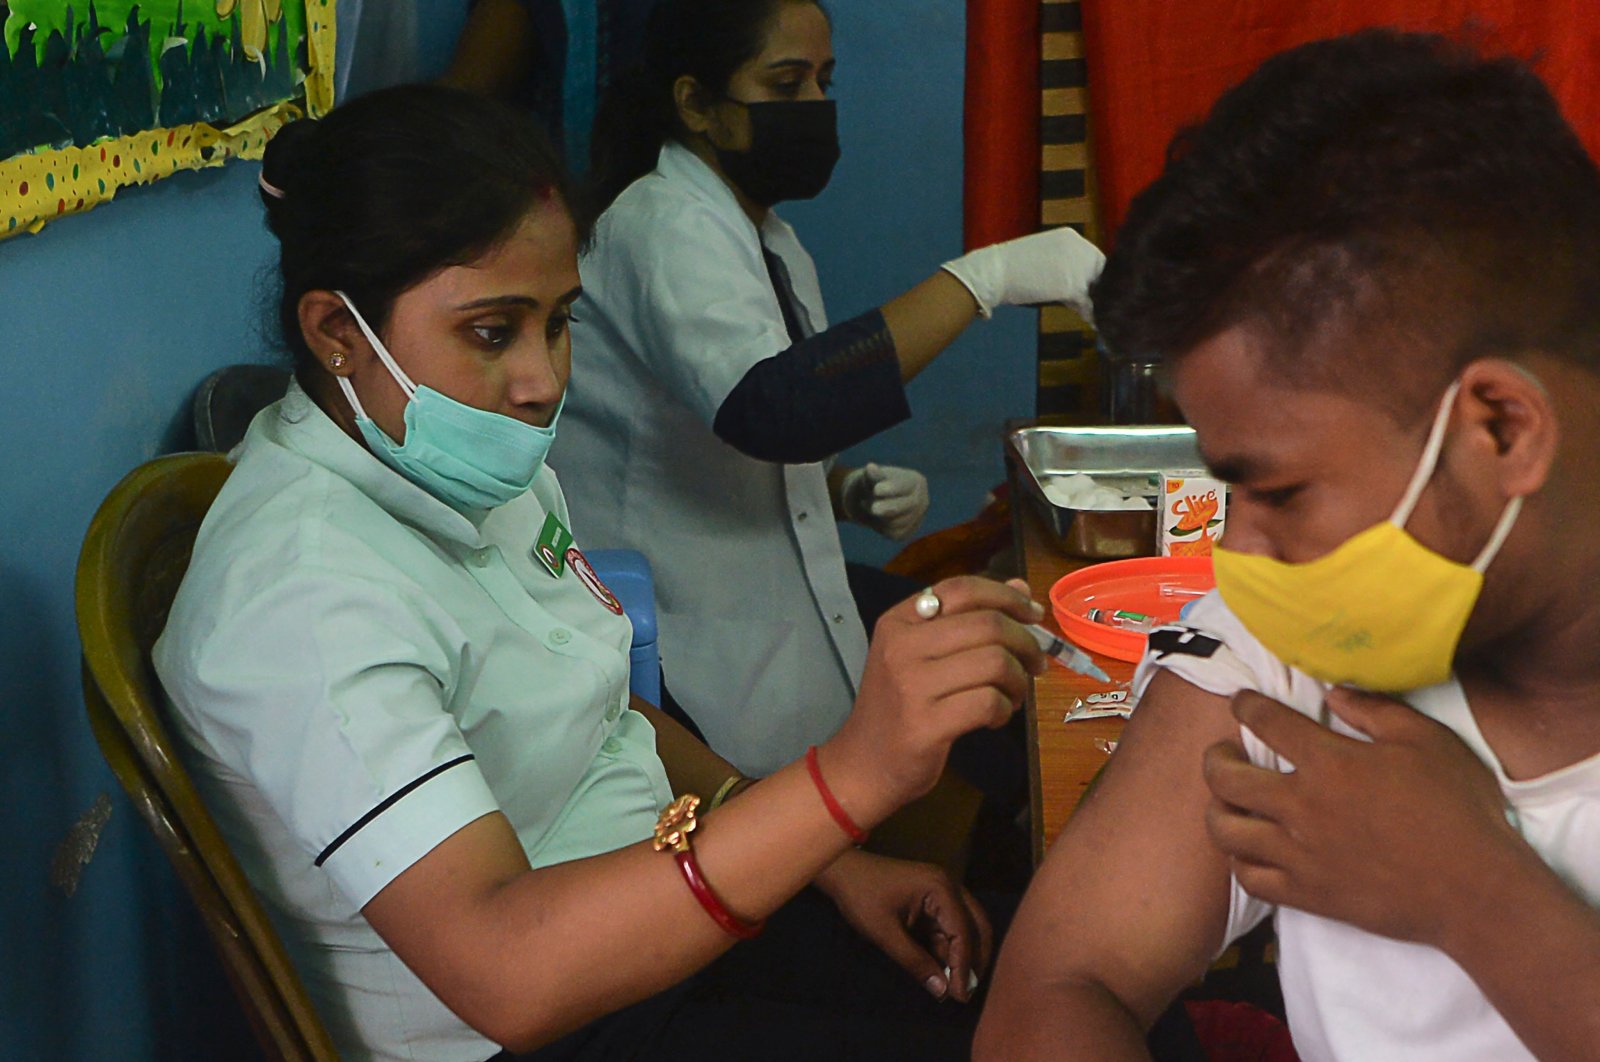 A healthcare worker inoculates a man against COVID-19 at the Bright Academy school in Siliguri, India, Aug. 7, 2021. (Photo by Diptendu DUTTA / AFP)